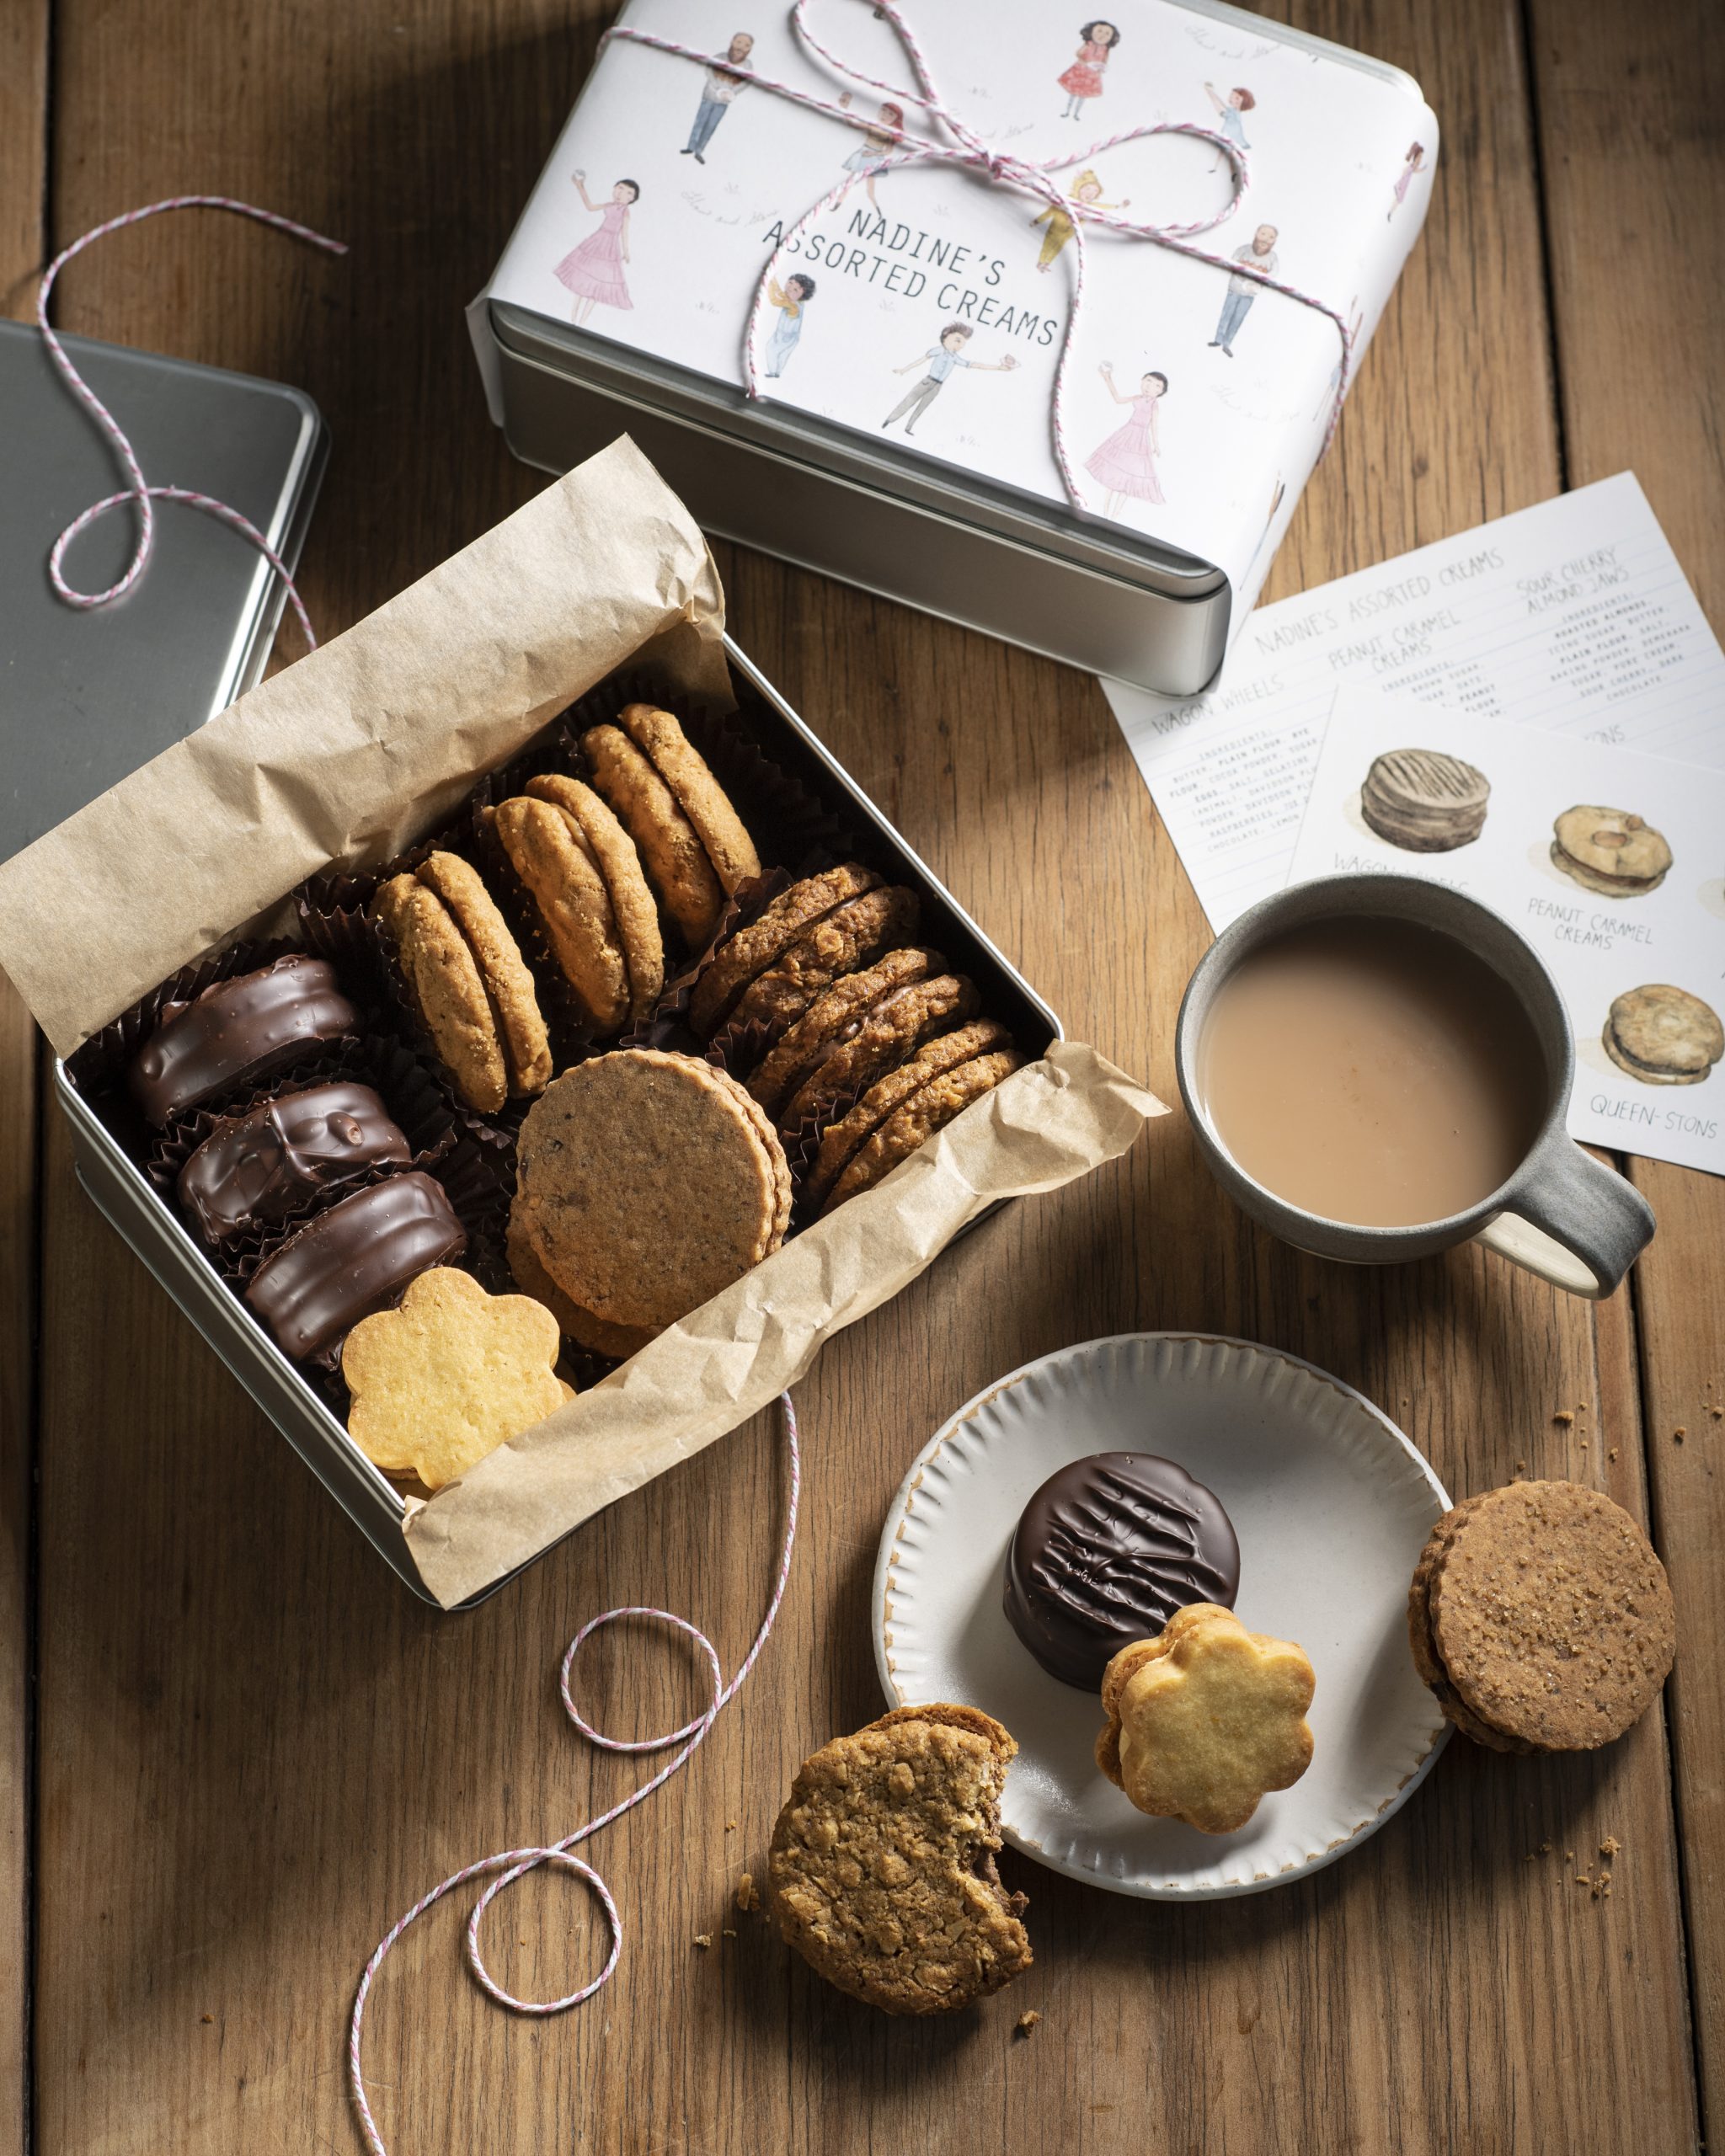 Nadine's Assorted Creams: Indulgent delights, perfect for any occasion